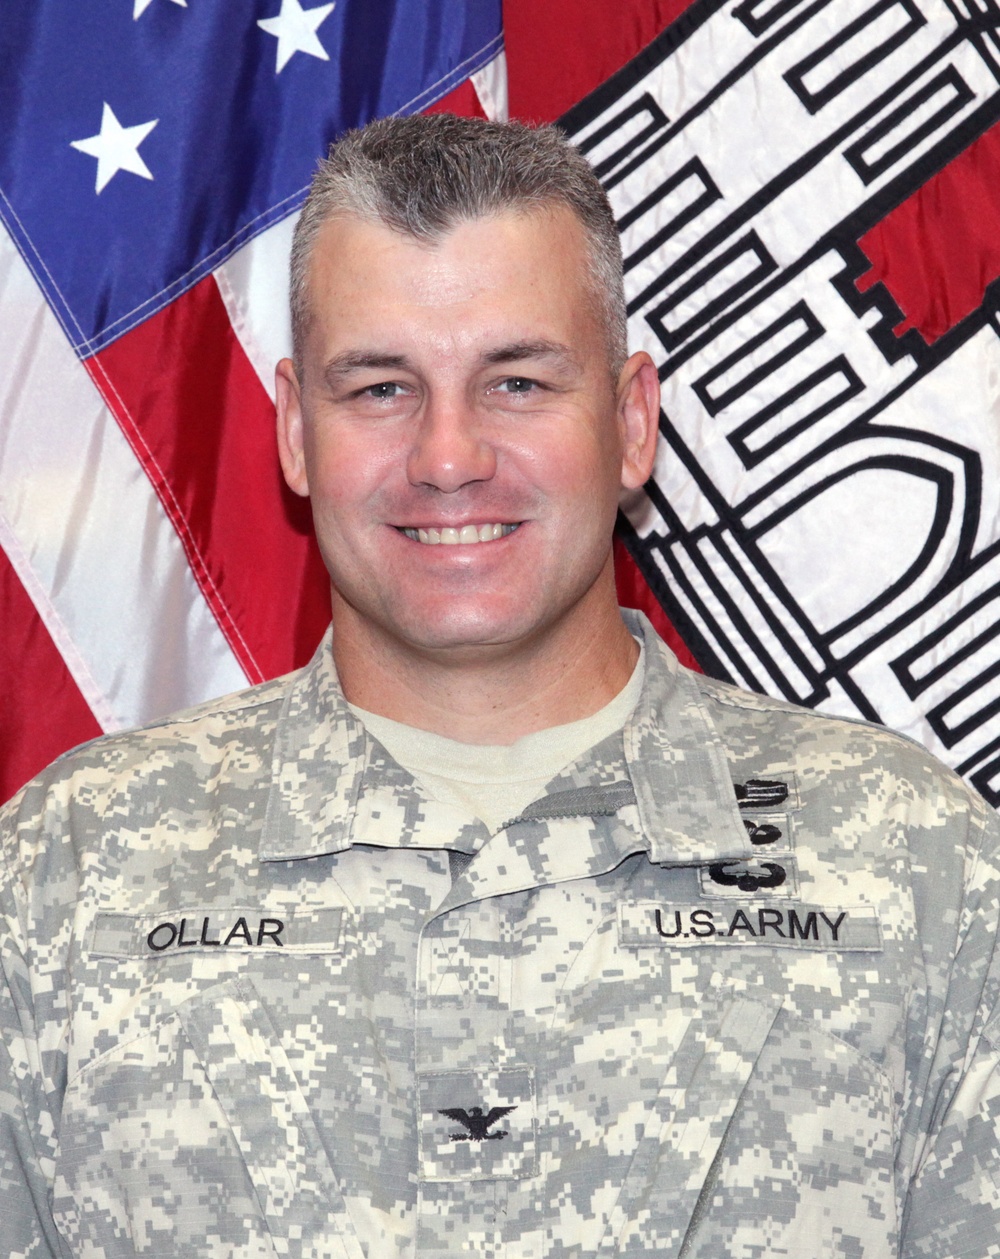 Southwestern Division welcomes Ollar as new deputy commander